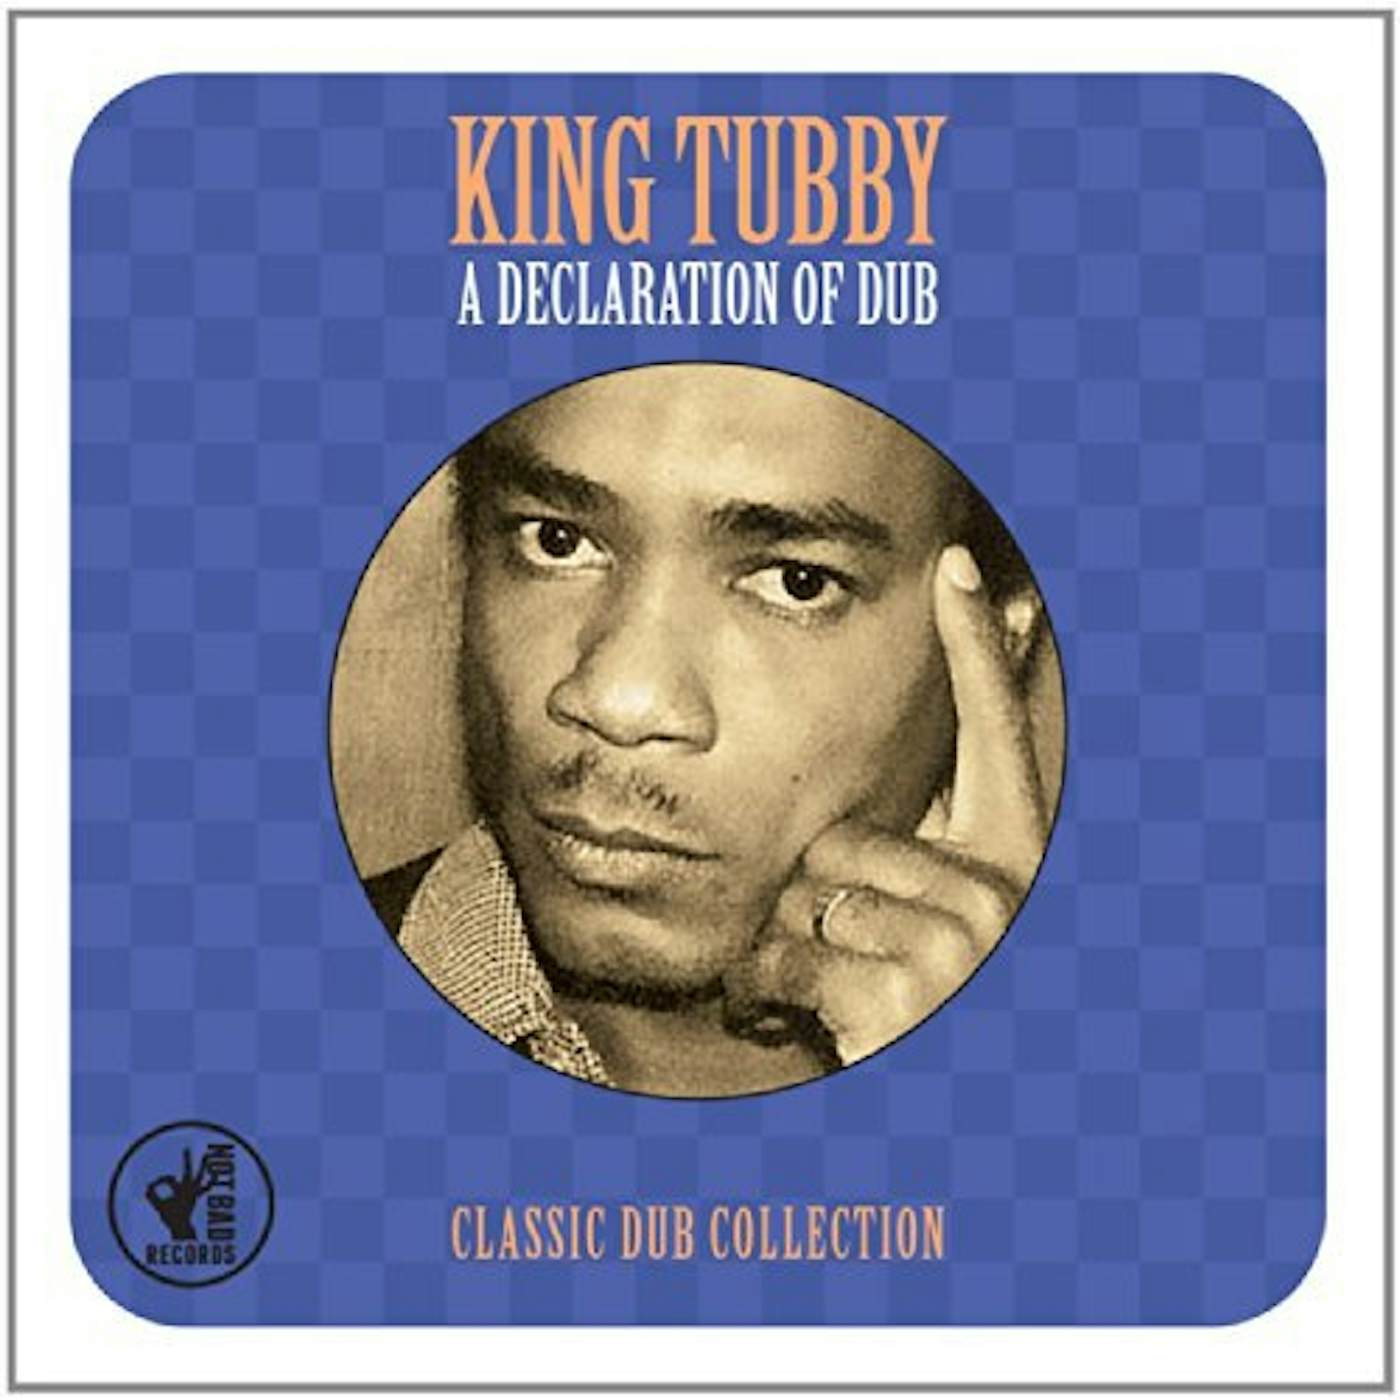 King Tubby CLASSIC DUB COLLECTION CD